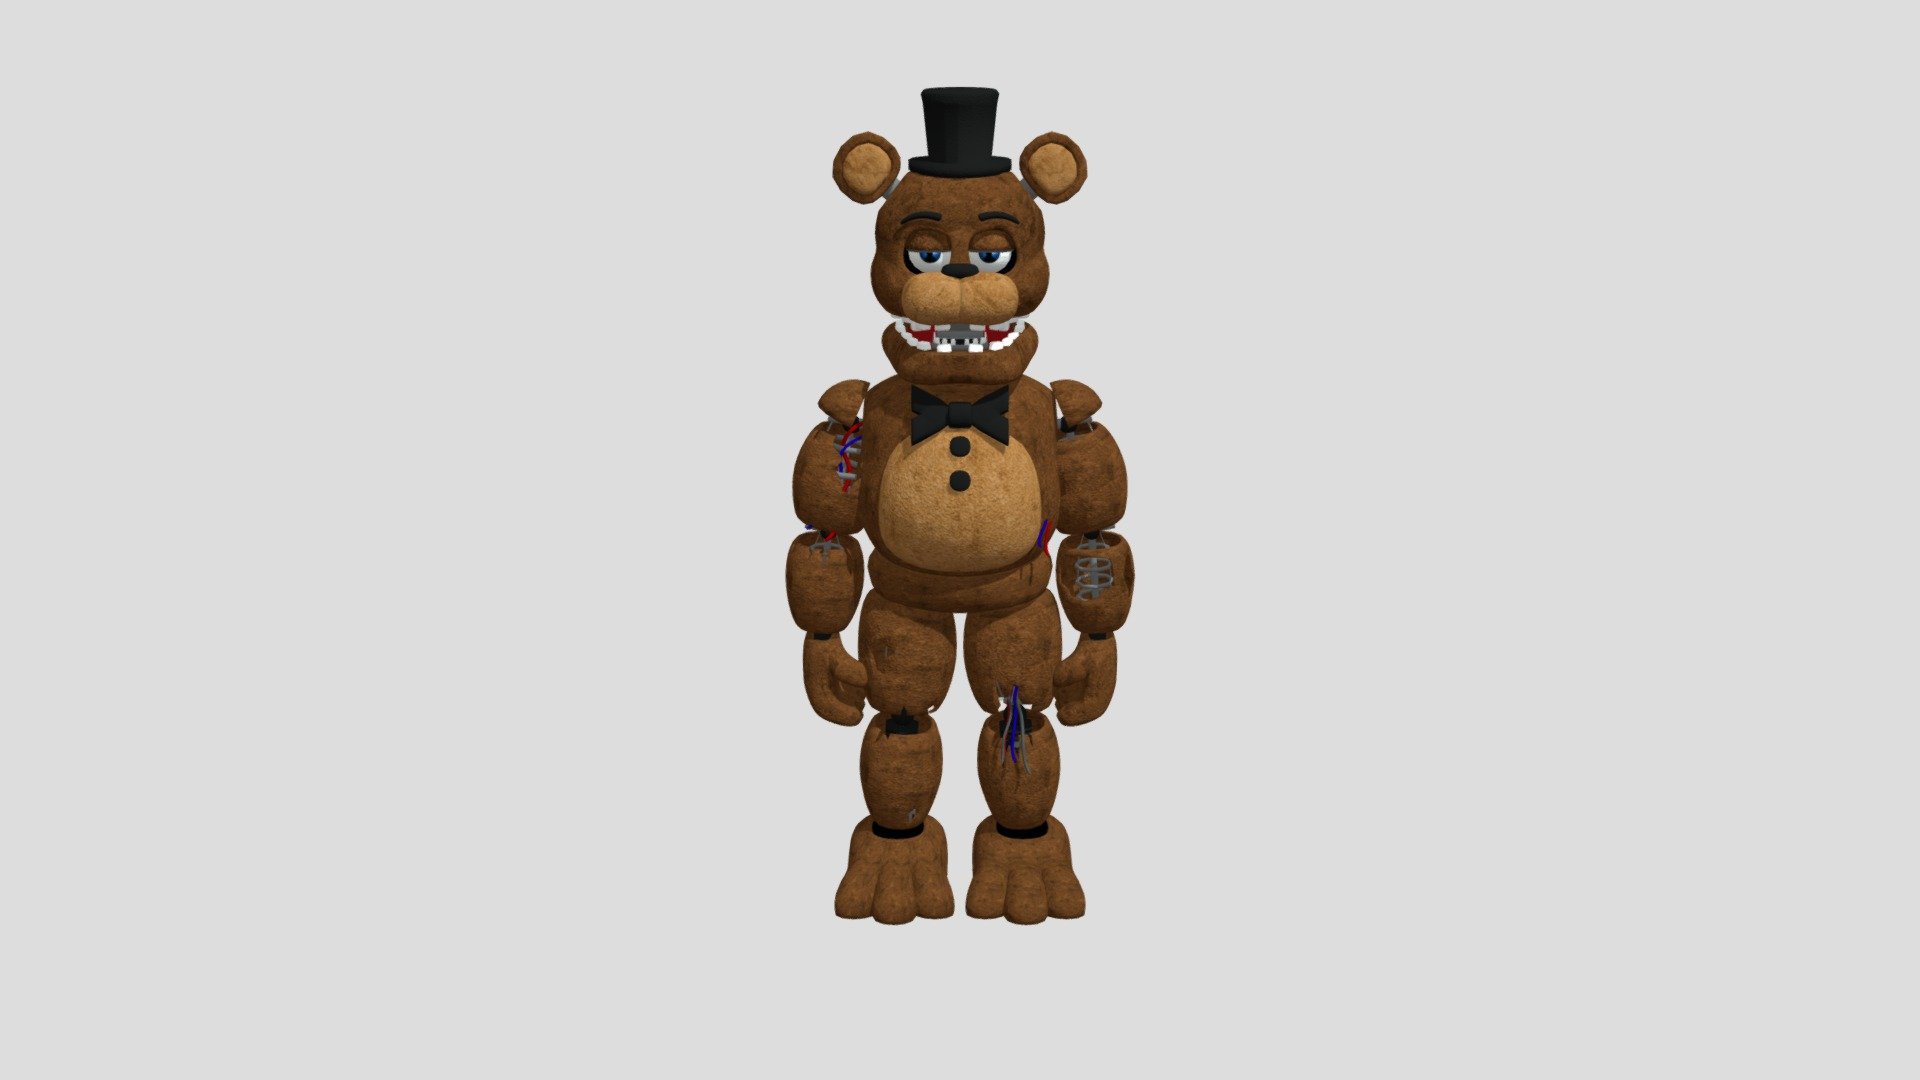 Withered Freddy (FNaF 2)